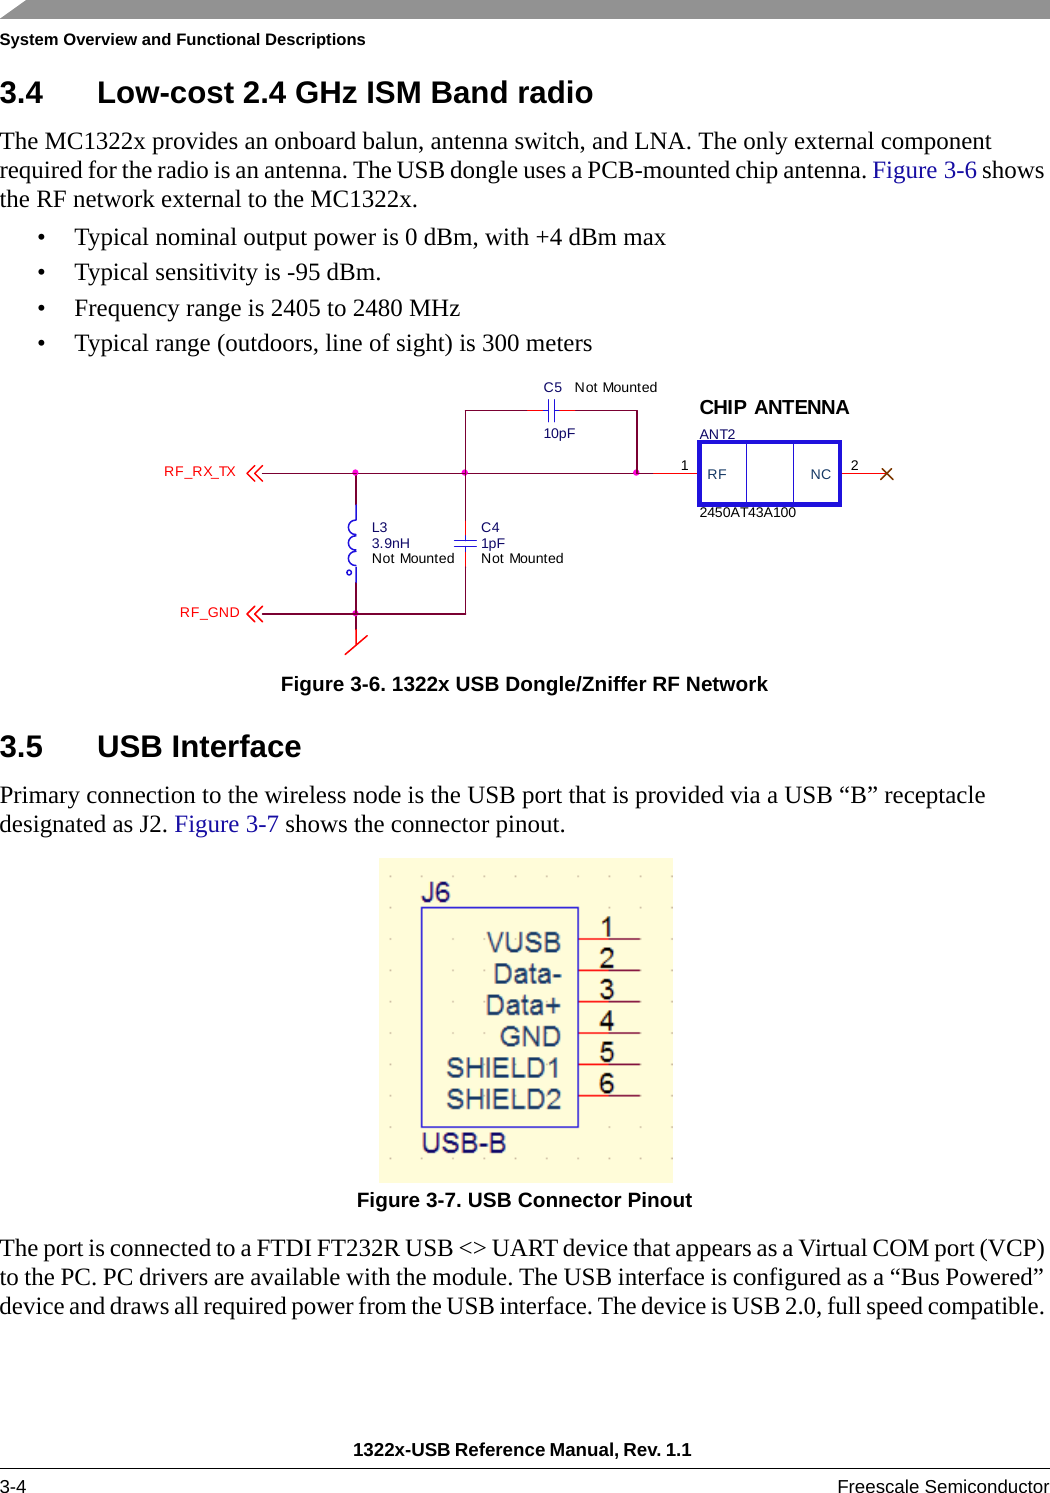 System Overview and Functional Descriptions1322x-USB Reference Manual, Rev. 1.1 3-4 Freescale Semiconductor3.4 Low-cost 2.4 GHz ISM Band radioThe MC1322x provides an onboard balun, antenna switch, and LNA. The only external component required for the radio is an antenna. The USB dongle uses a PCB-mounted chip antenna. Figure 3-6 shows the RF network external to the MC1322x.• Typical nominal output power is 0 dBm, with +4 dBm max• Typical sensitivity is -95 dBm.• Frequency range is 2405 to 2480 MHz• Typical range (outdoors, line of sight) is 300 metersFigure 3-6. 1322x USB Dongle/Zniffer RF Network3.5 USB InterfacePrimary connection to the wireless node is the USB port that is provided via a USB “B” receptacle designated as J2. Figure 3-7 shows the connector pinout.Figure 3-7. USB Connector PinoutThe port is connected to a FTDI FT232R USB &lt;&gt; UART device that appears as a Virtual COM port (VCP) to the PC. PC drivers are available with the module. The USB interface is configured as a “Bus Powered” device and draws all required power from the USB interface. The device is USB 2.0, full speed compatible.  RF_RX_TXCHIP ANTENNAL33.9nHNot MountedNC 2RF1ANT22450AT43A100C41pFNot MountedC510pFNot MountedRF_GND